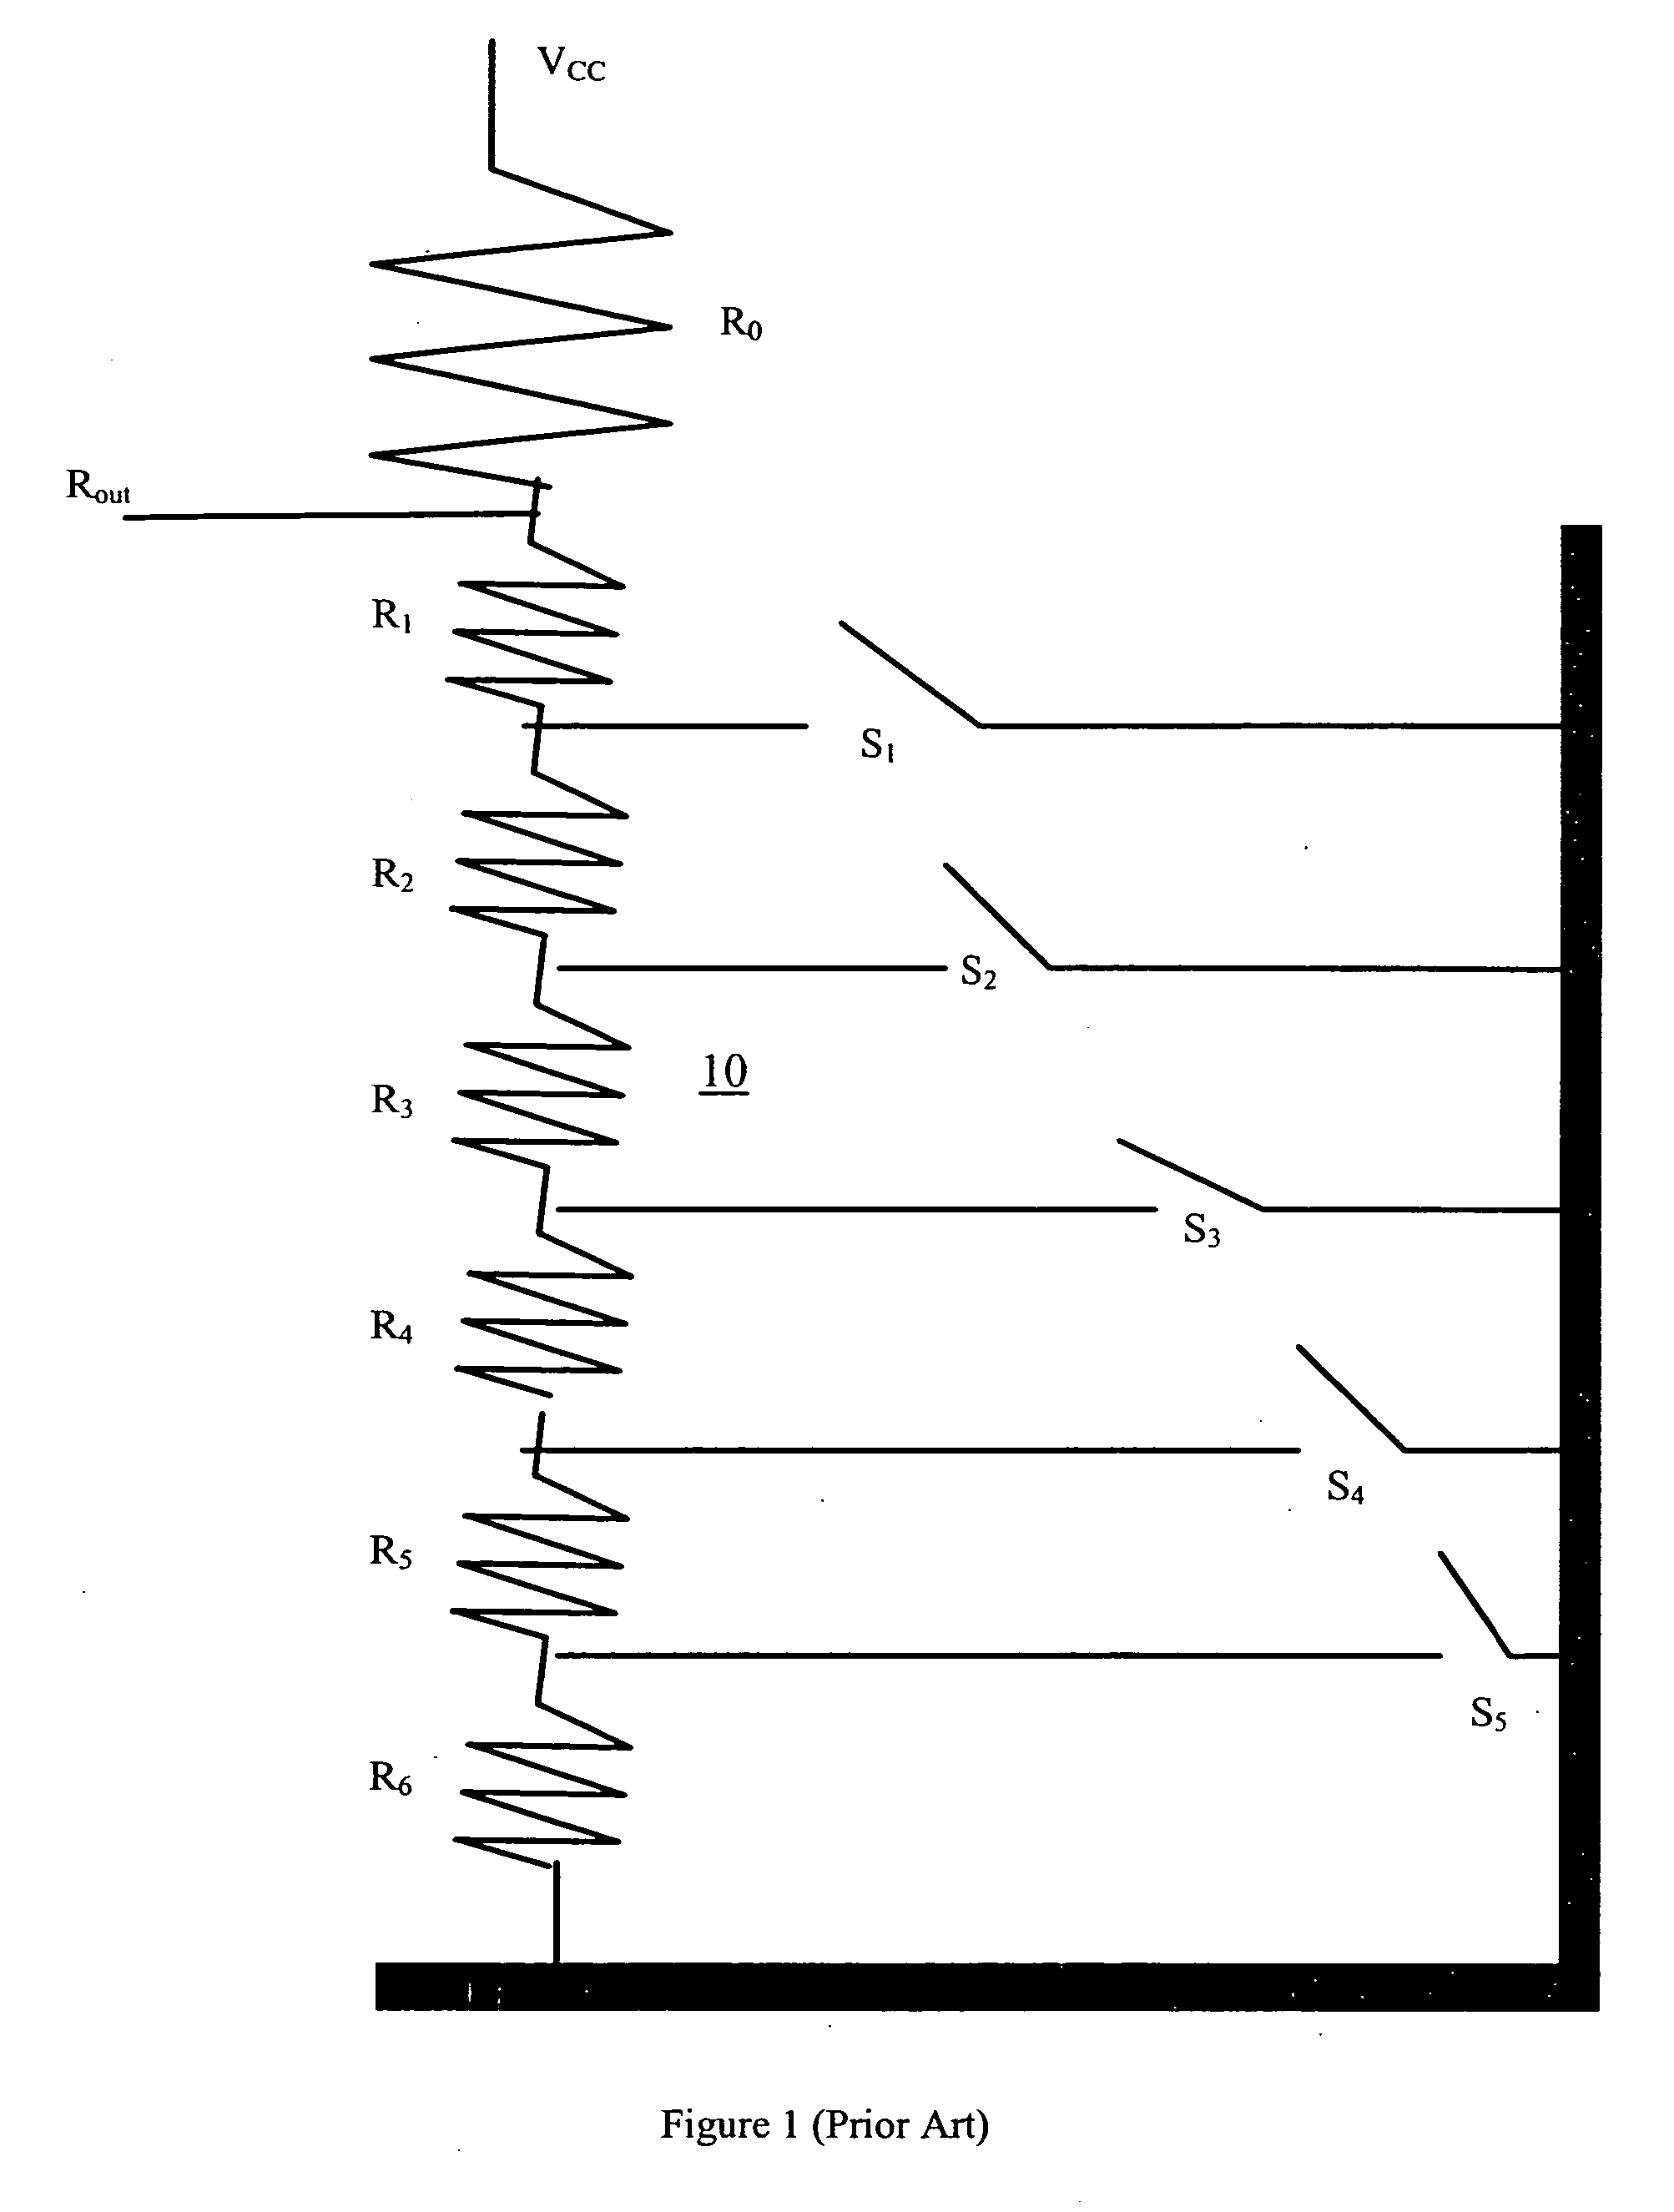 Dynamically tunable resistor or capacitor using a non-volatile floating gate memory cell